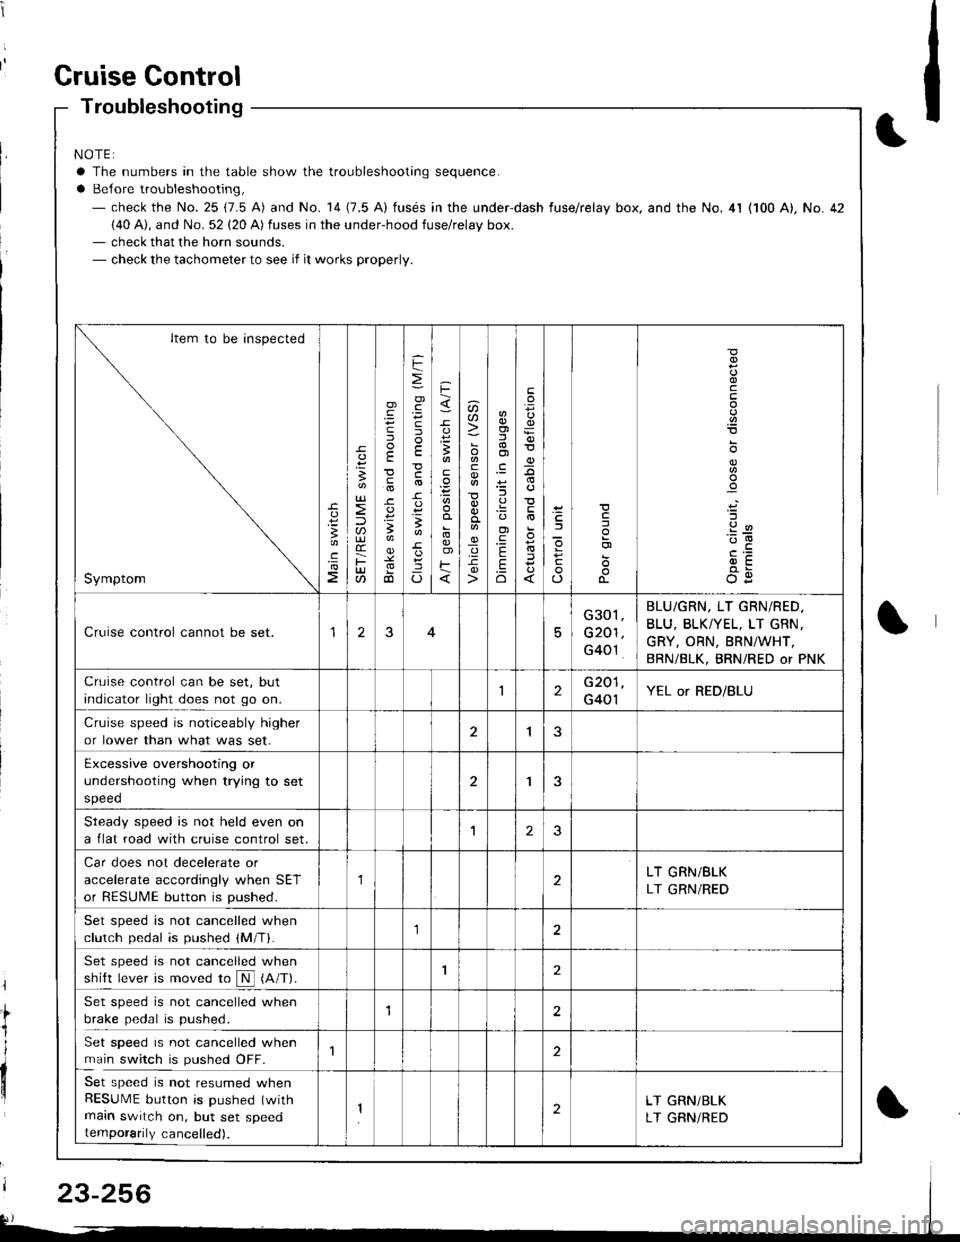 HONDA INTEGRA 1998 4.G Owners Manual t
t;
il
I
dil
Gruise Gontrol
Troubleshooting
NOTE:
a The numbers in the table show the troubleshooting sequence.
a Belore troubleshooting,- check the No. 25 (7.5 A) and No. 14 (7.5 A) fusds in the un